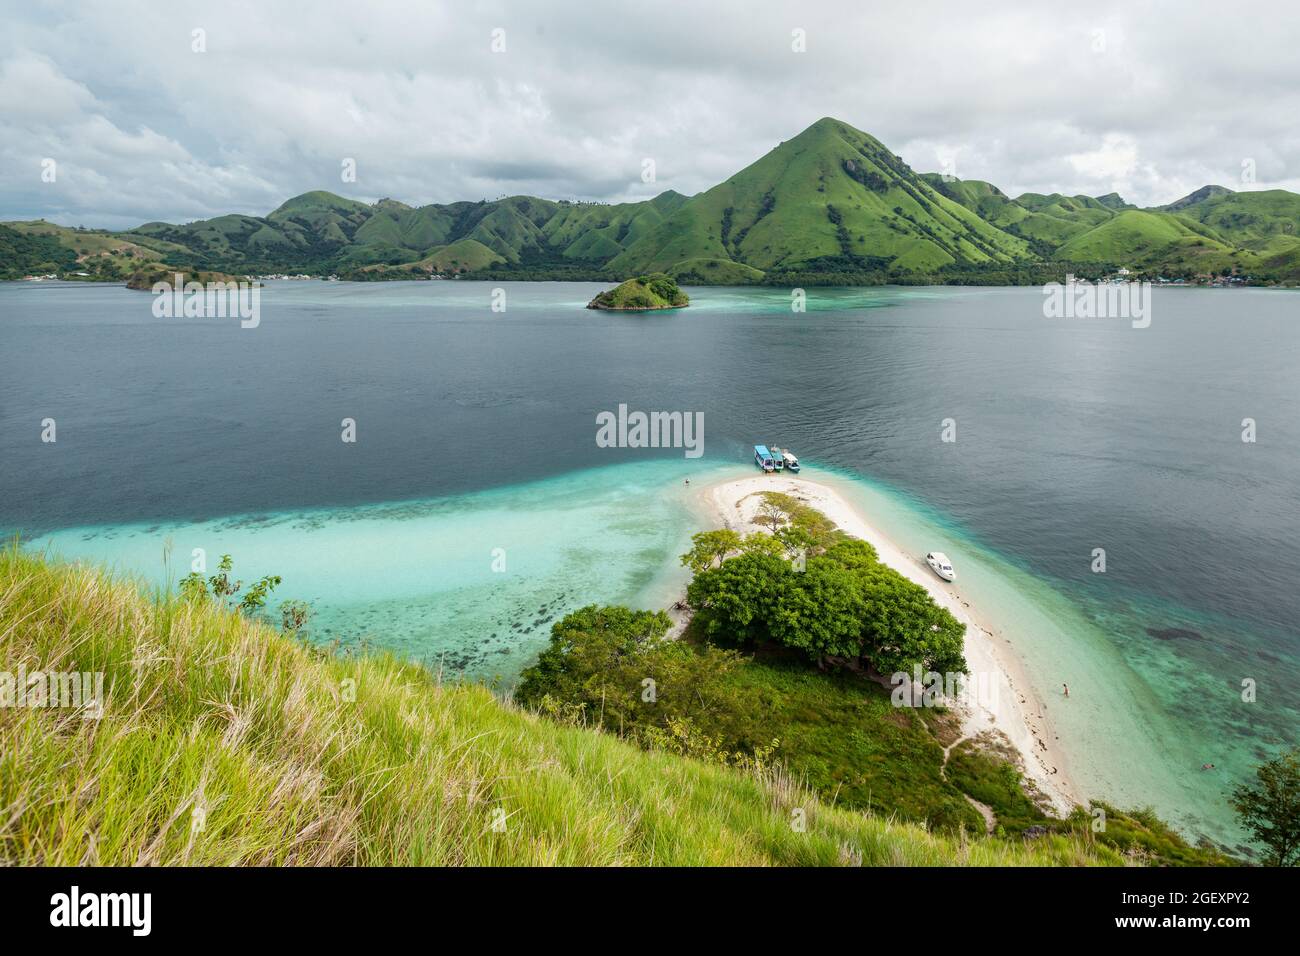 Stunning view on the green-capped mountains of Komodo island Stock Photo